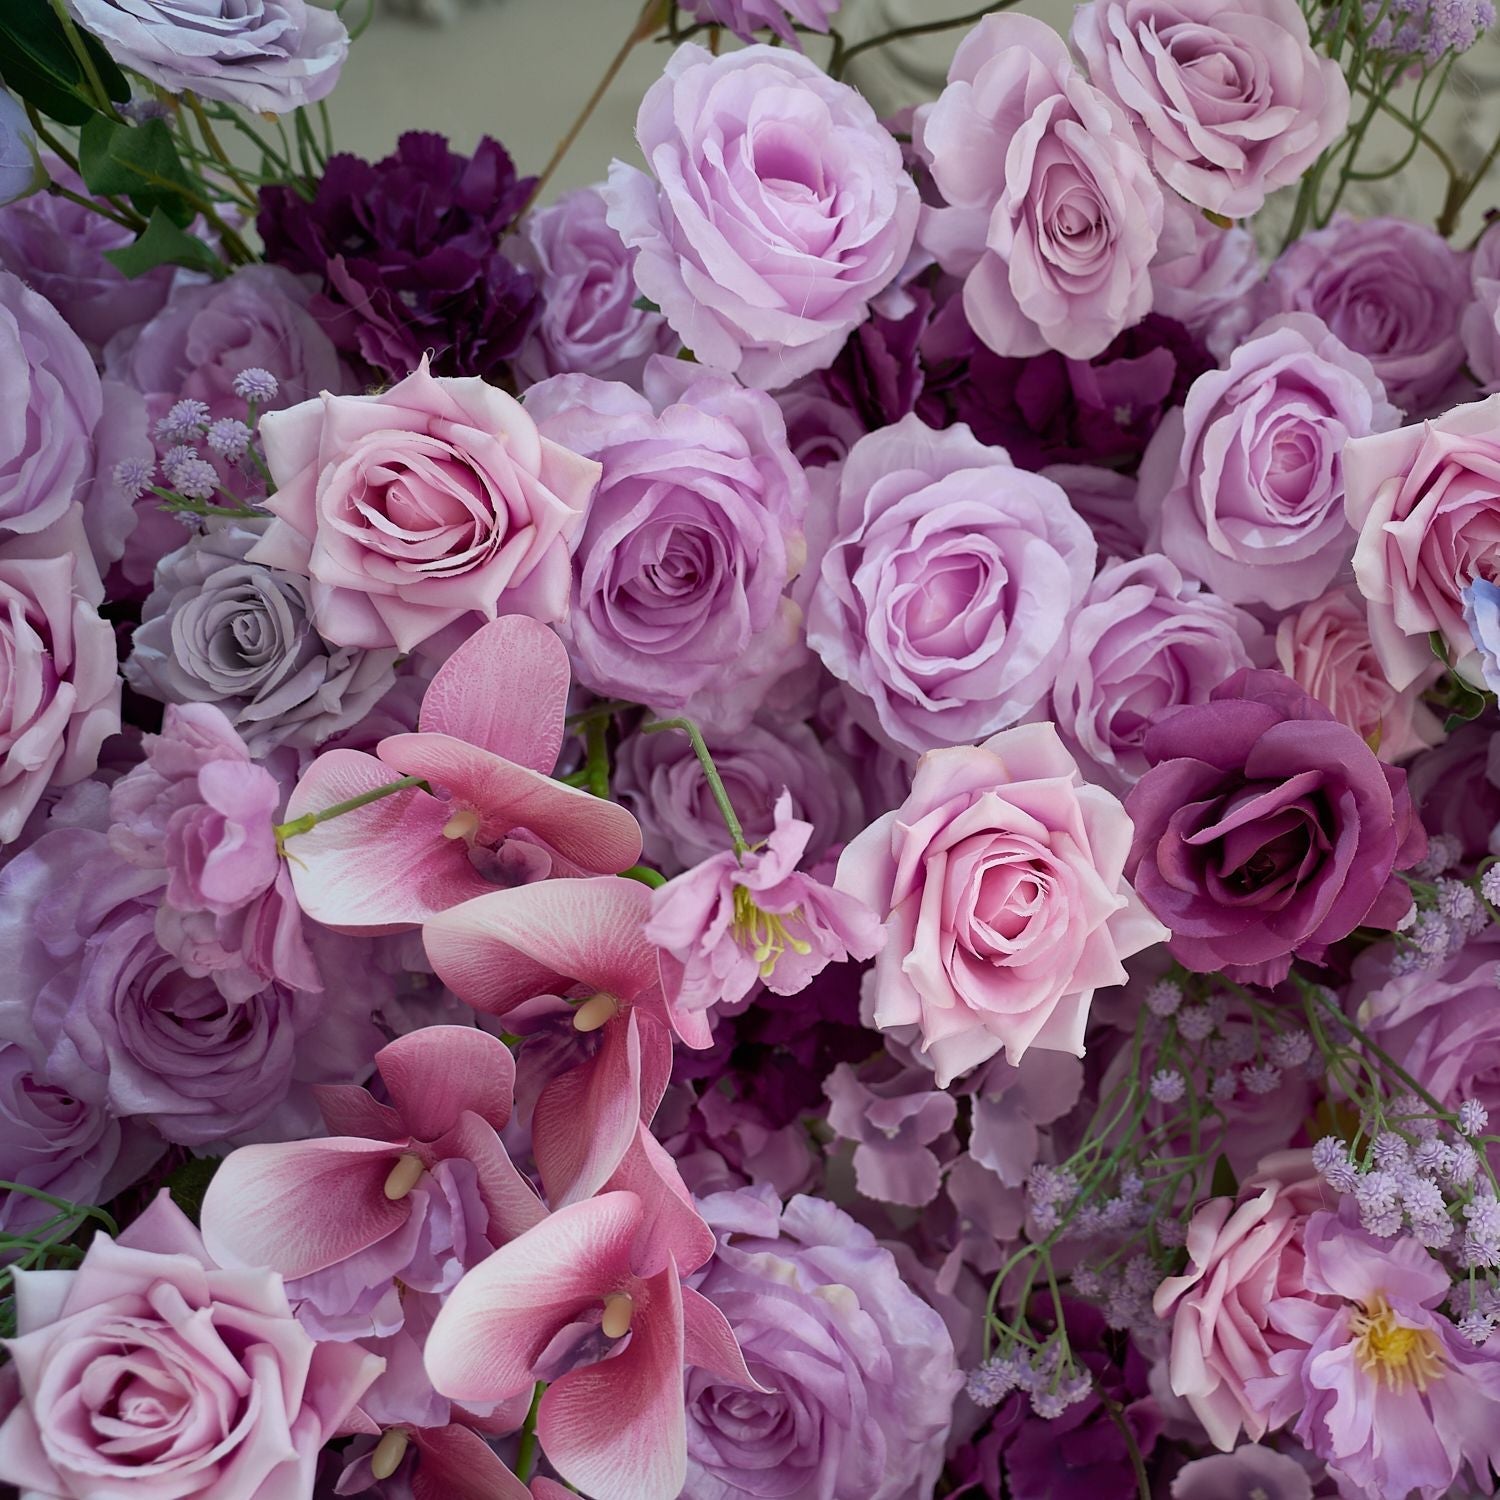 The purple roses florals flower wall looks vivid and lifelike.